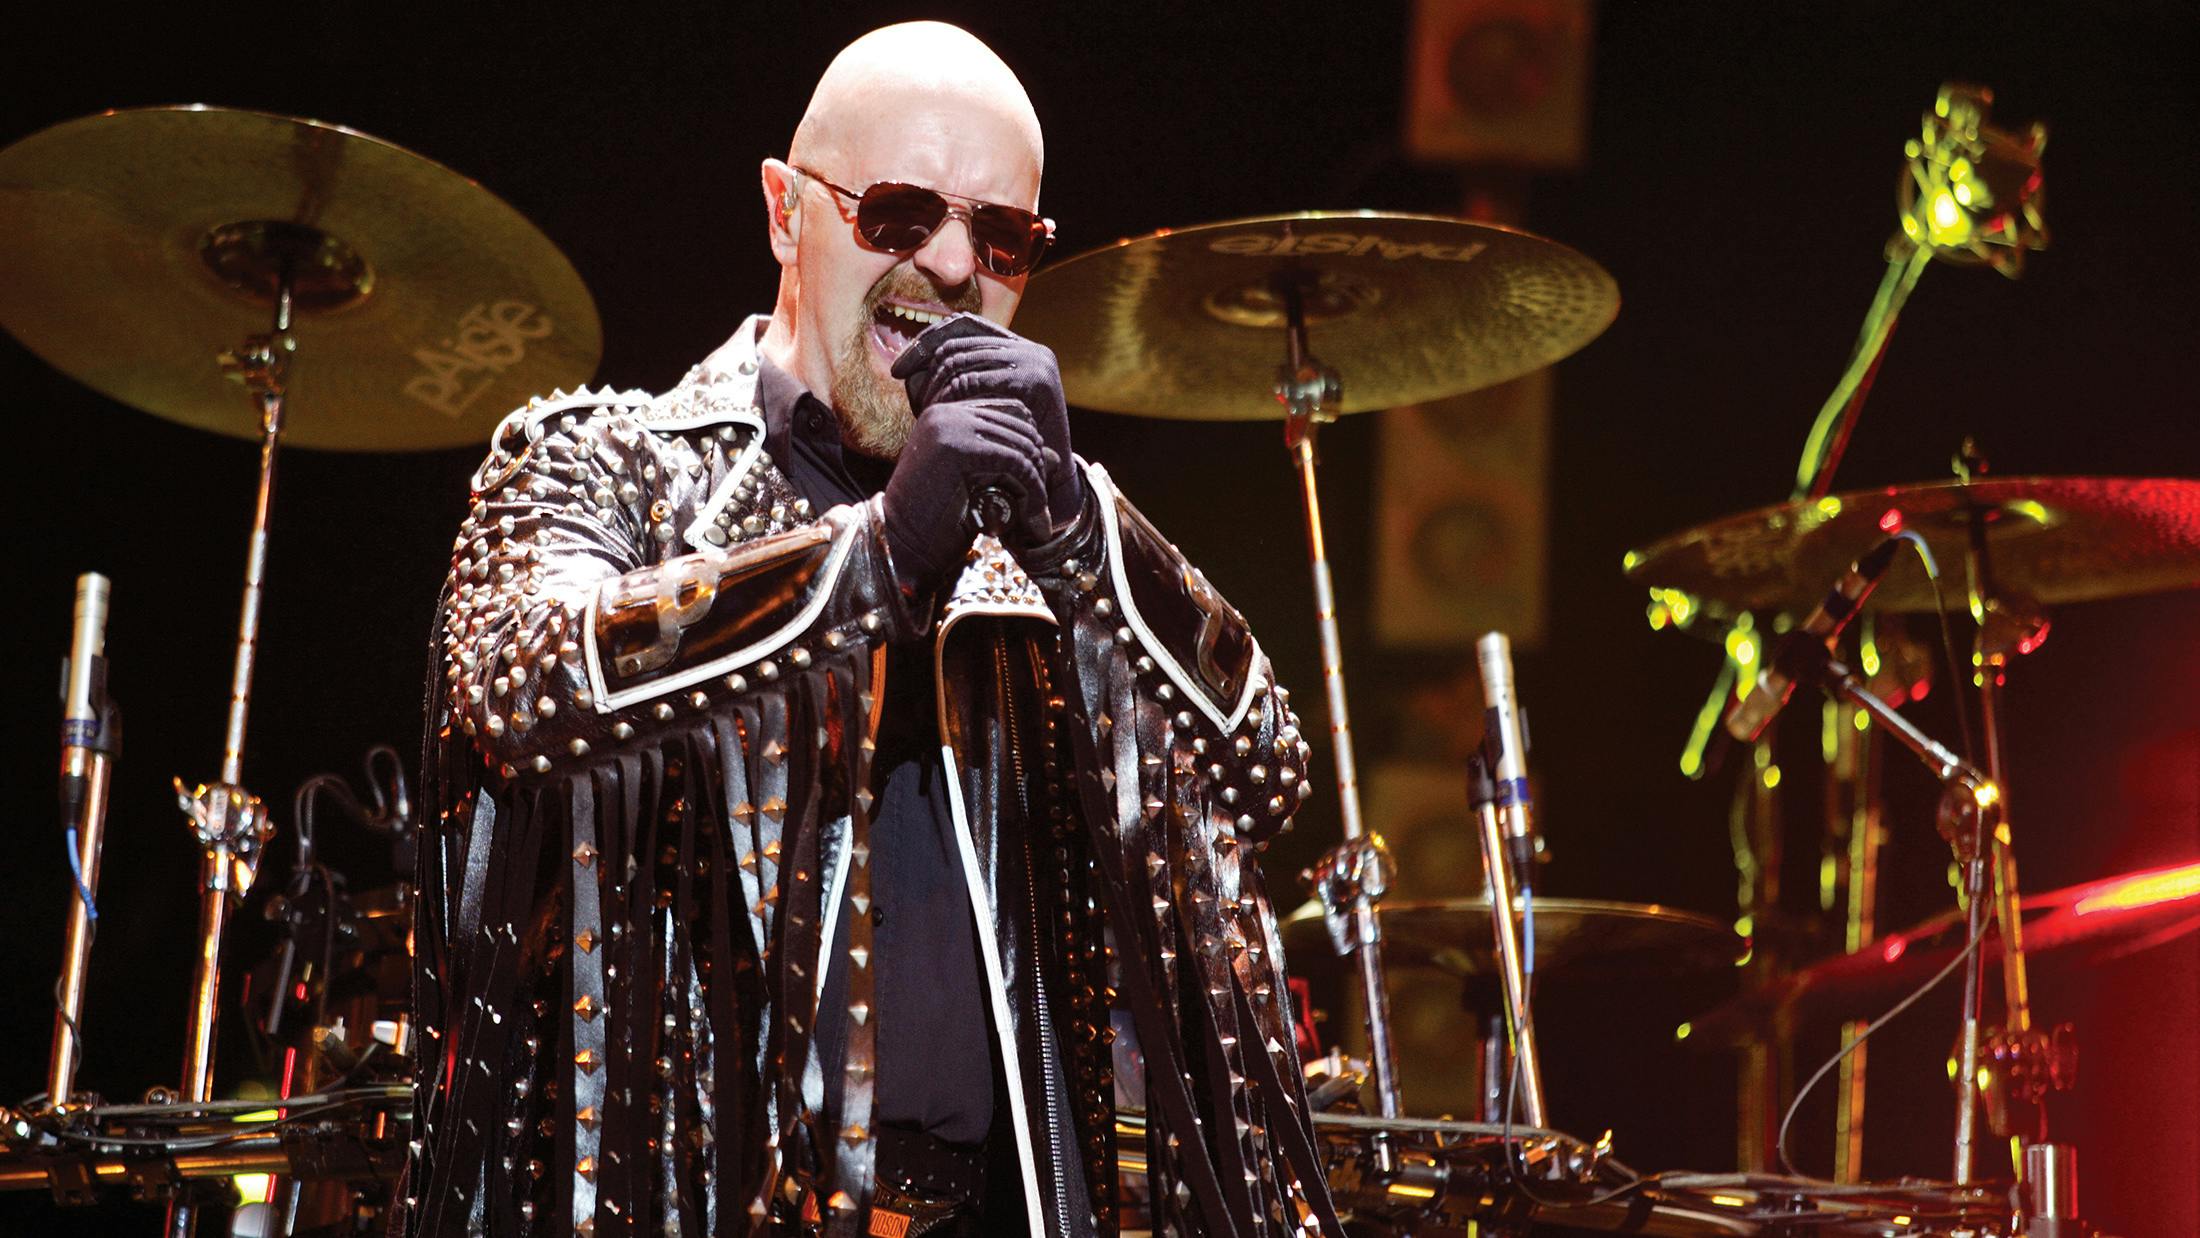 Judas Priest's Rob Halford: "It's 2018 And We Still Talk About Sexual Orientation, Skin Colour, 'My Religion's Better Than Yours…'"